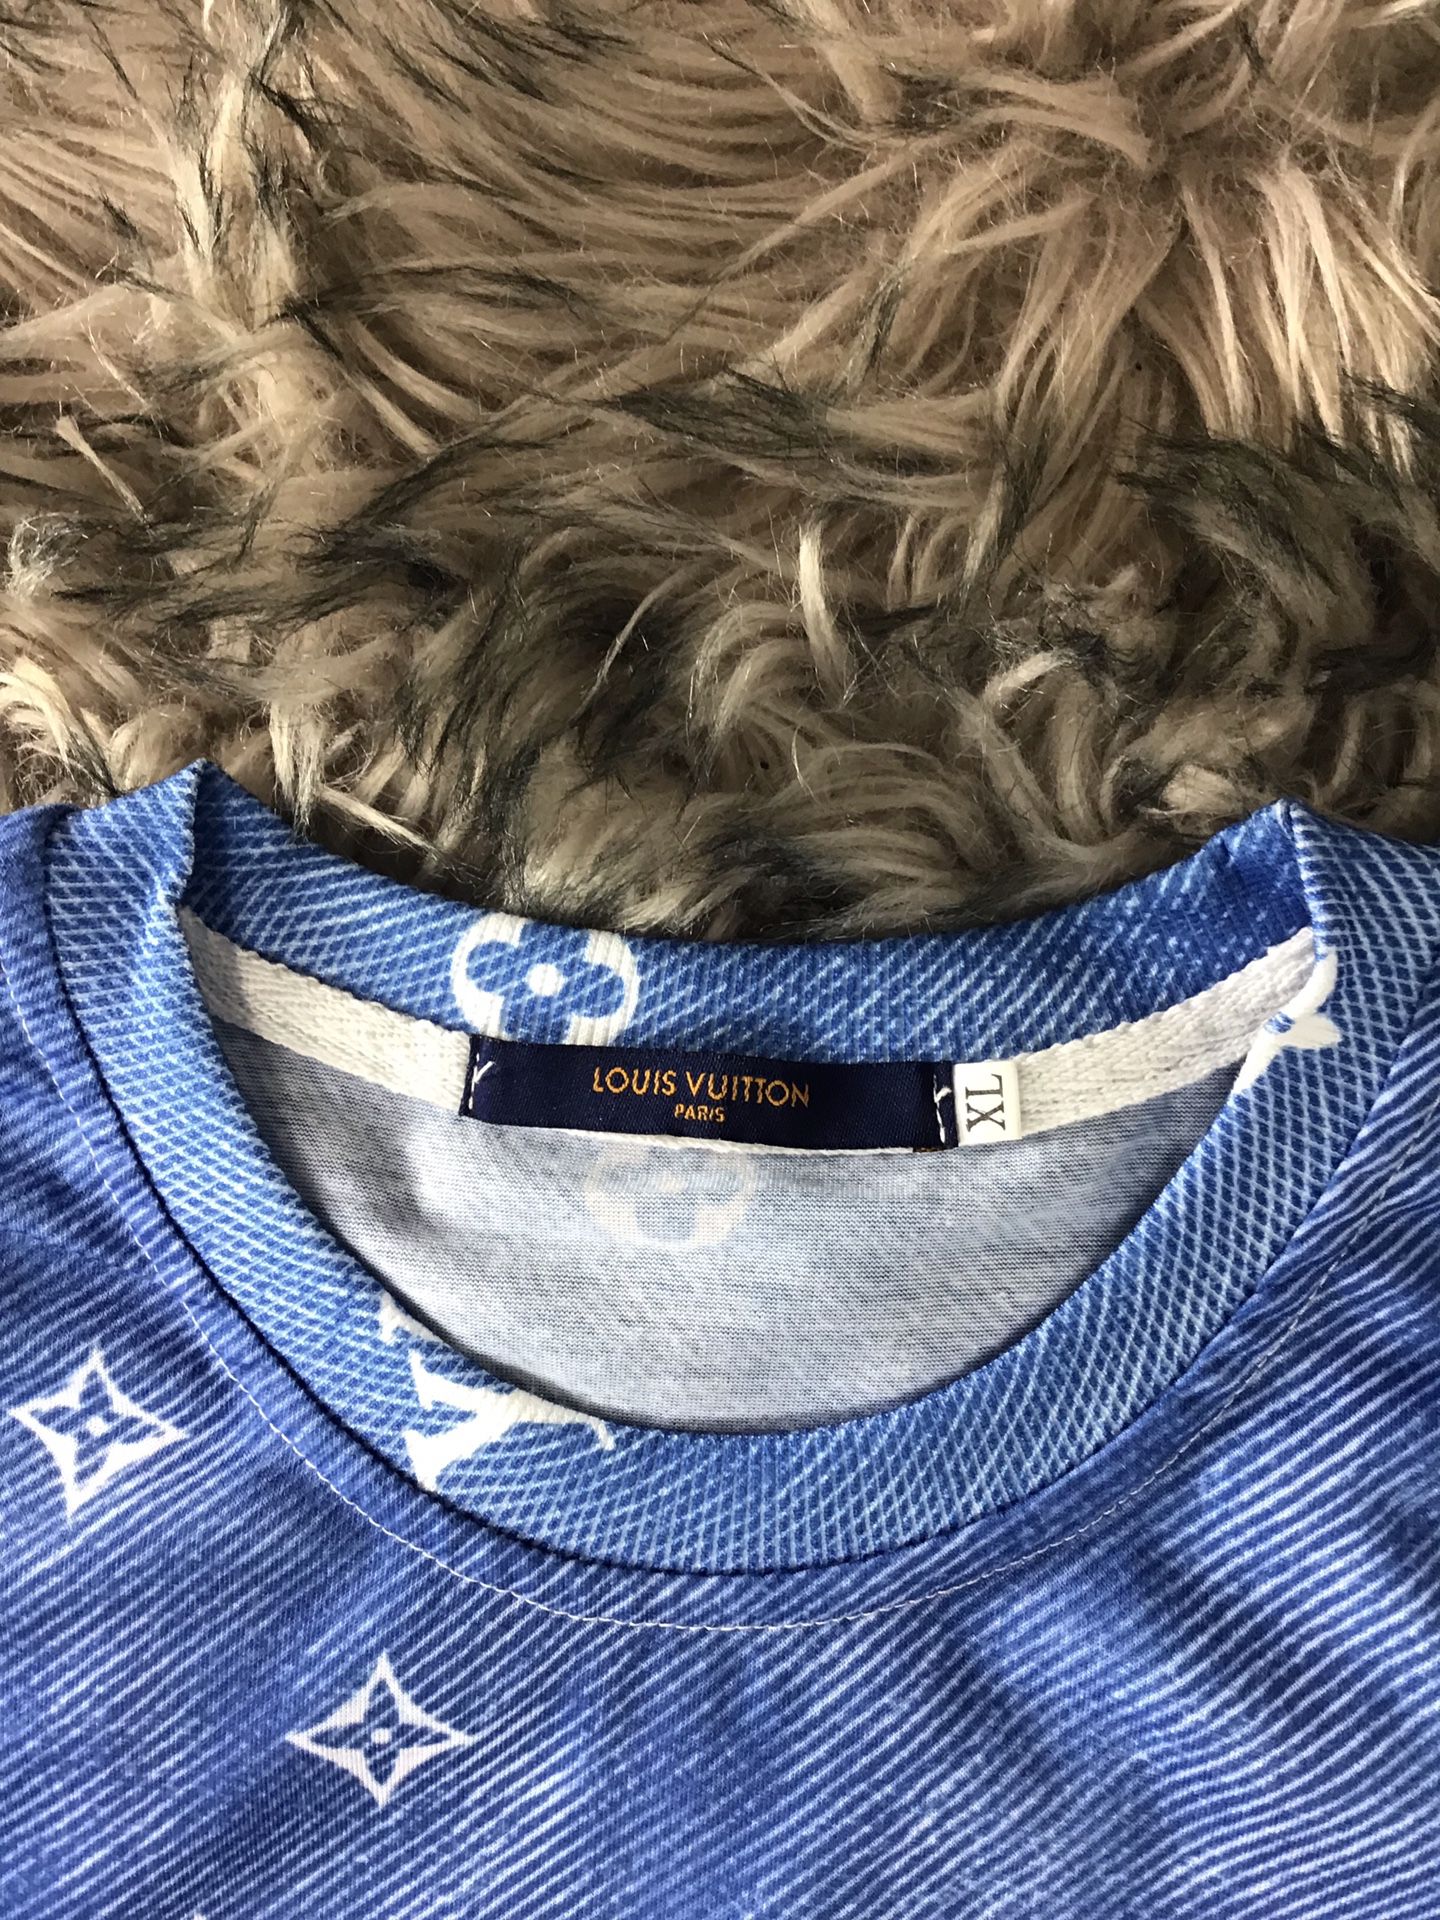 LV louis vuitton t shirt size M for Sale in Riley, OR - OfferUp